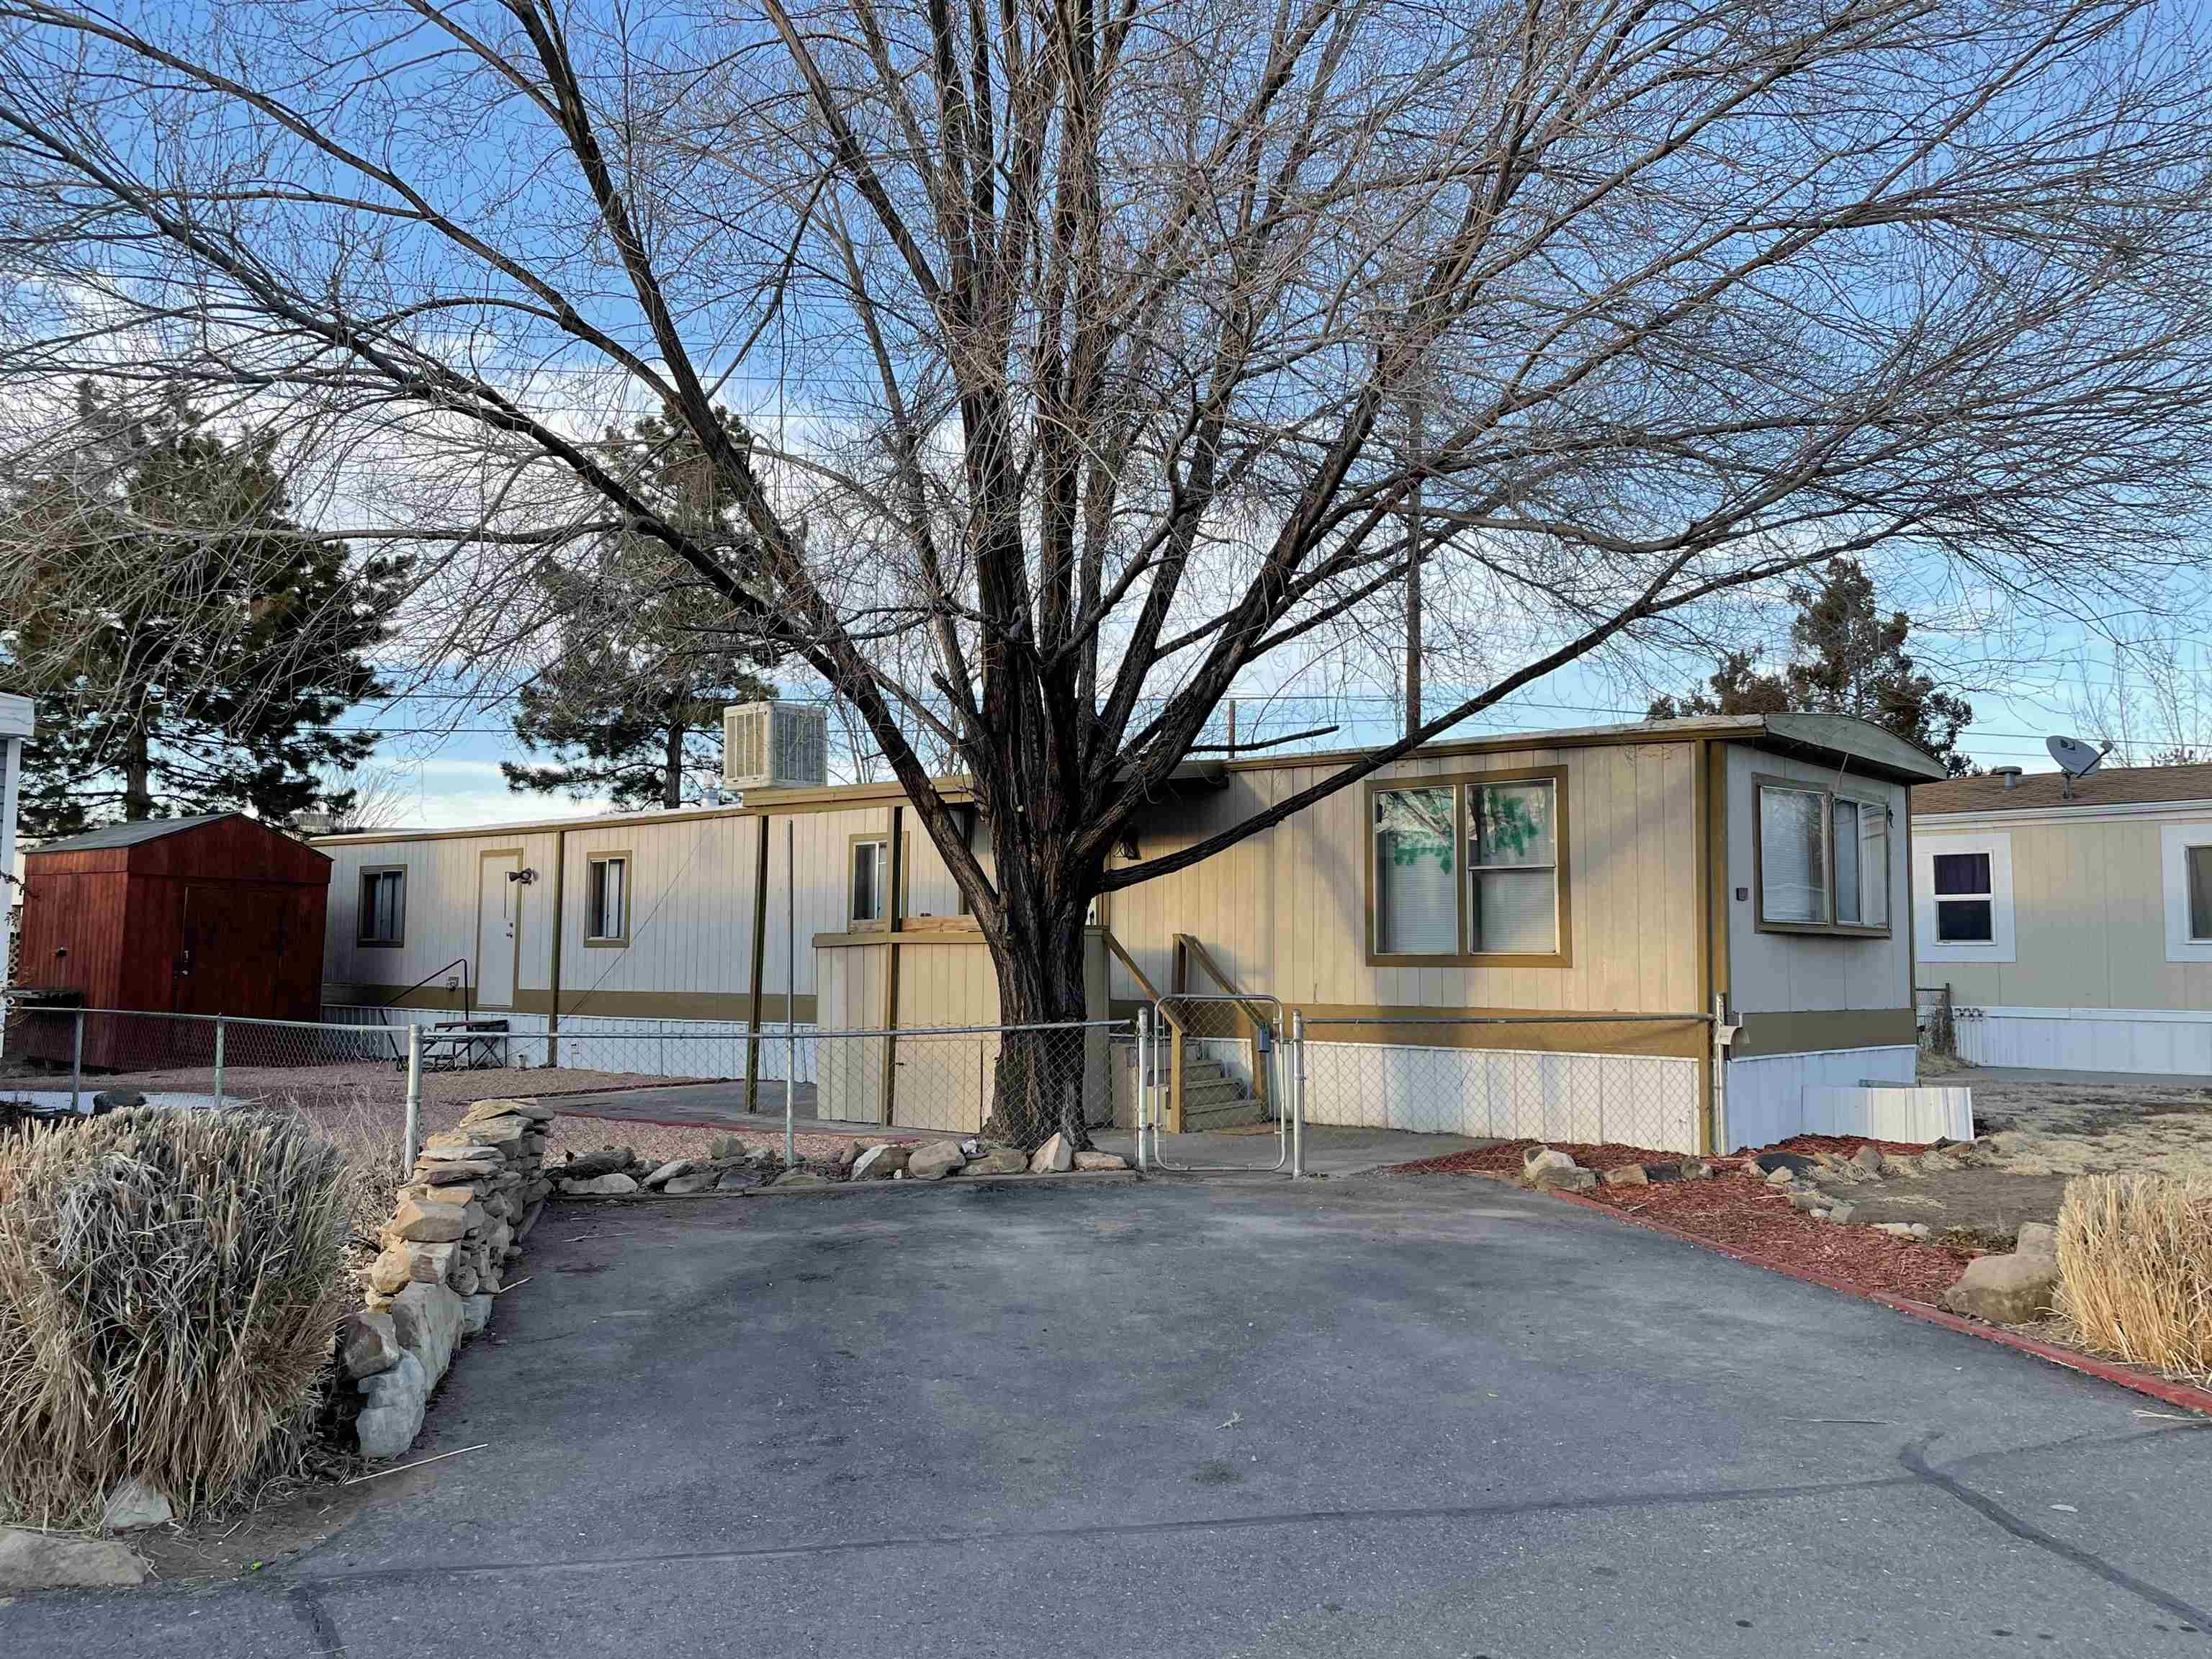 585 25 1/2 Road, Grand Junction, CO